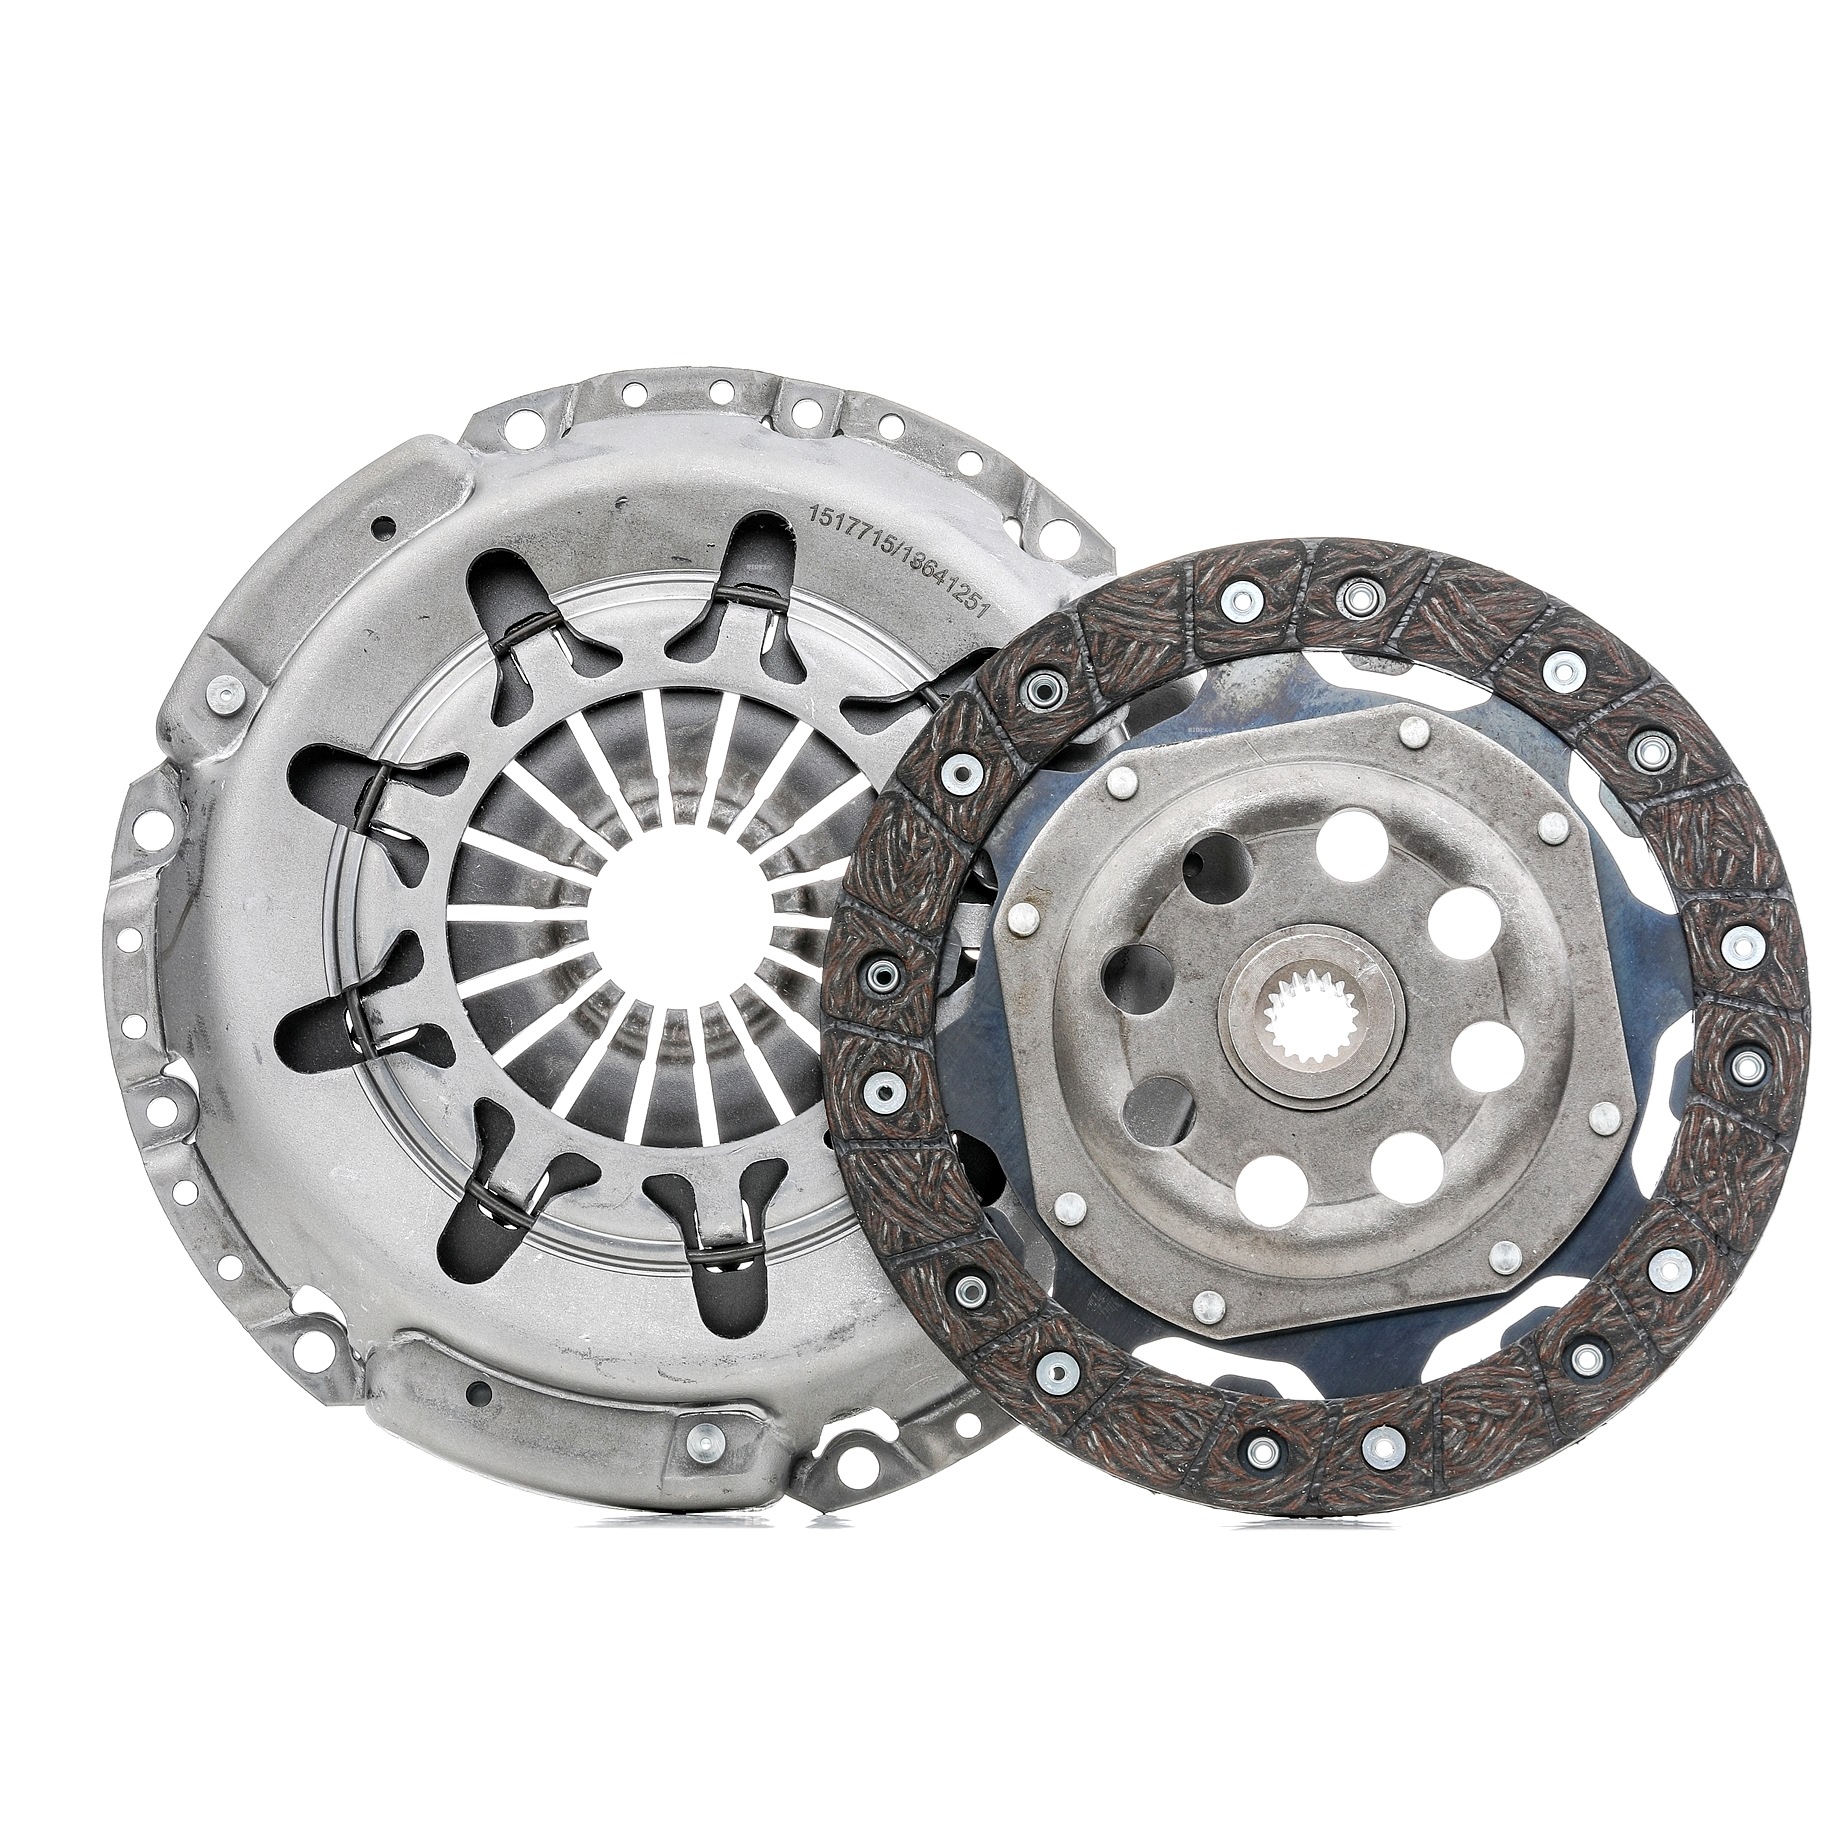 RIDEX 479C0226 Clutch kit two-piece, with clutch pressure plate, with clutch disc, without clutch release bearing, 210mm